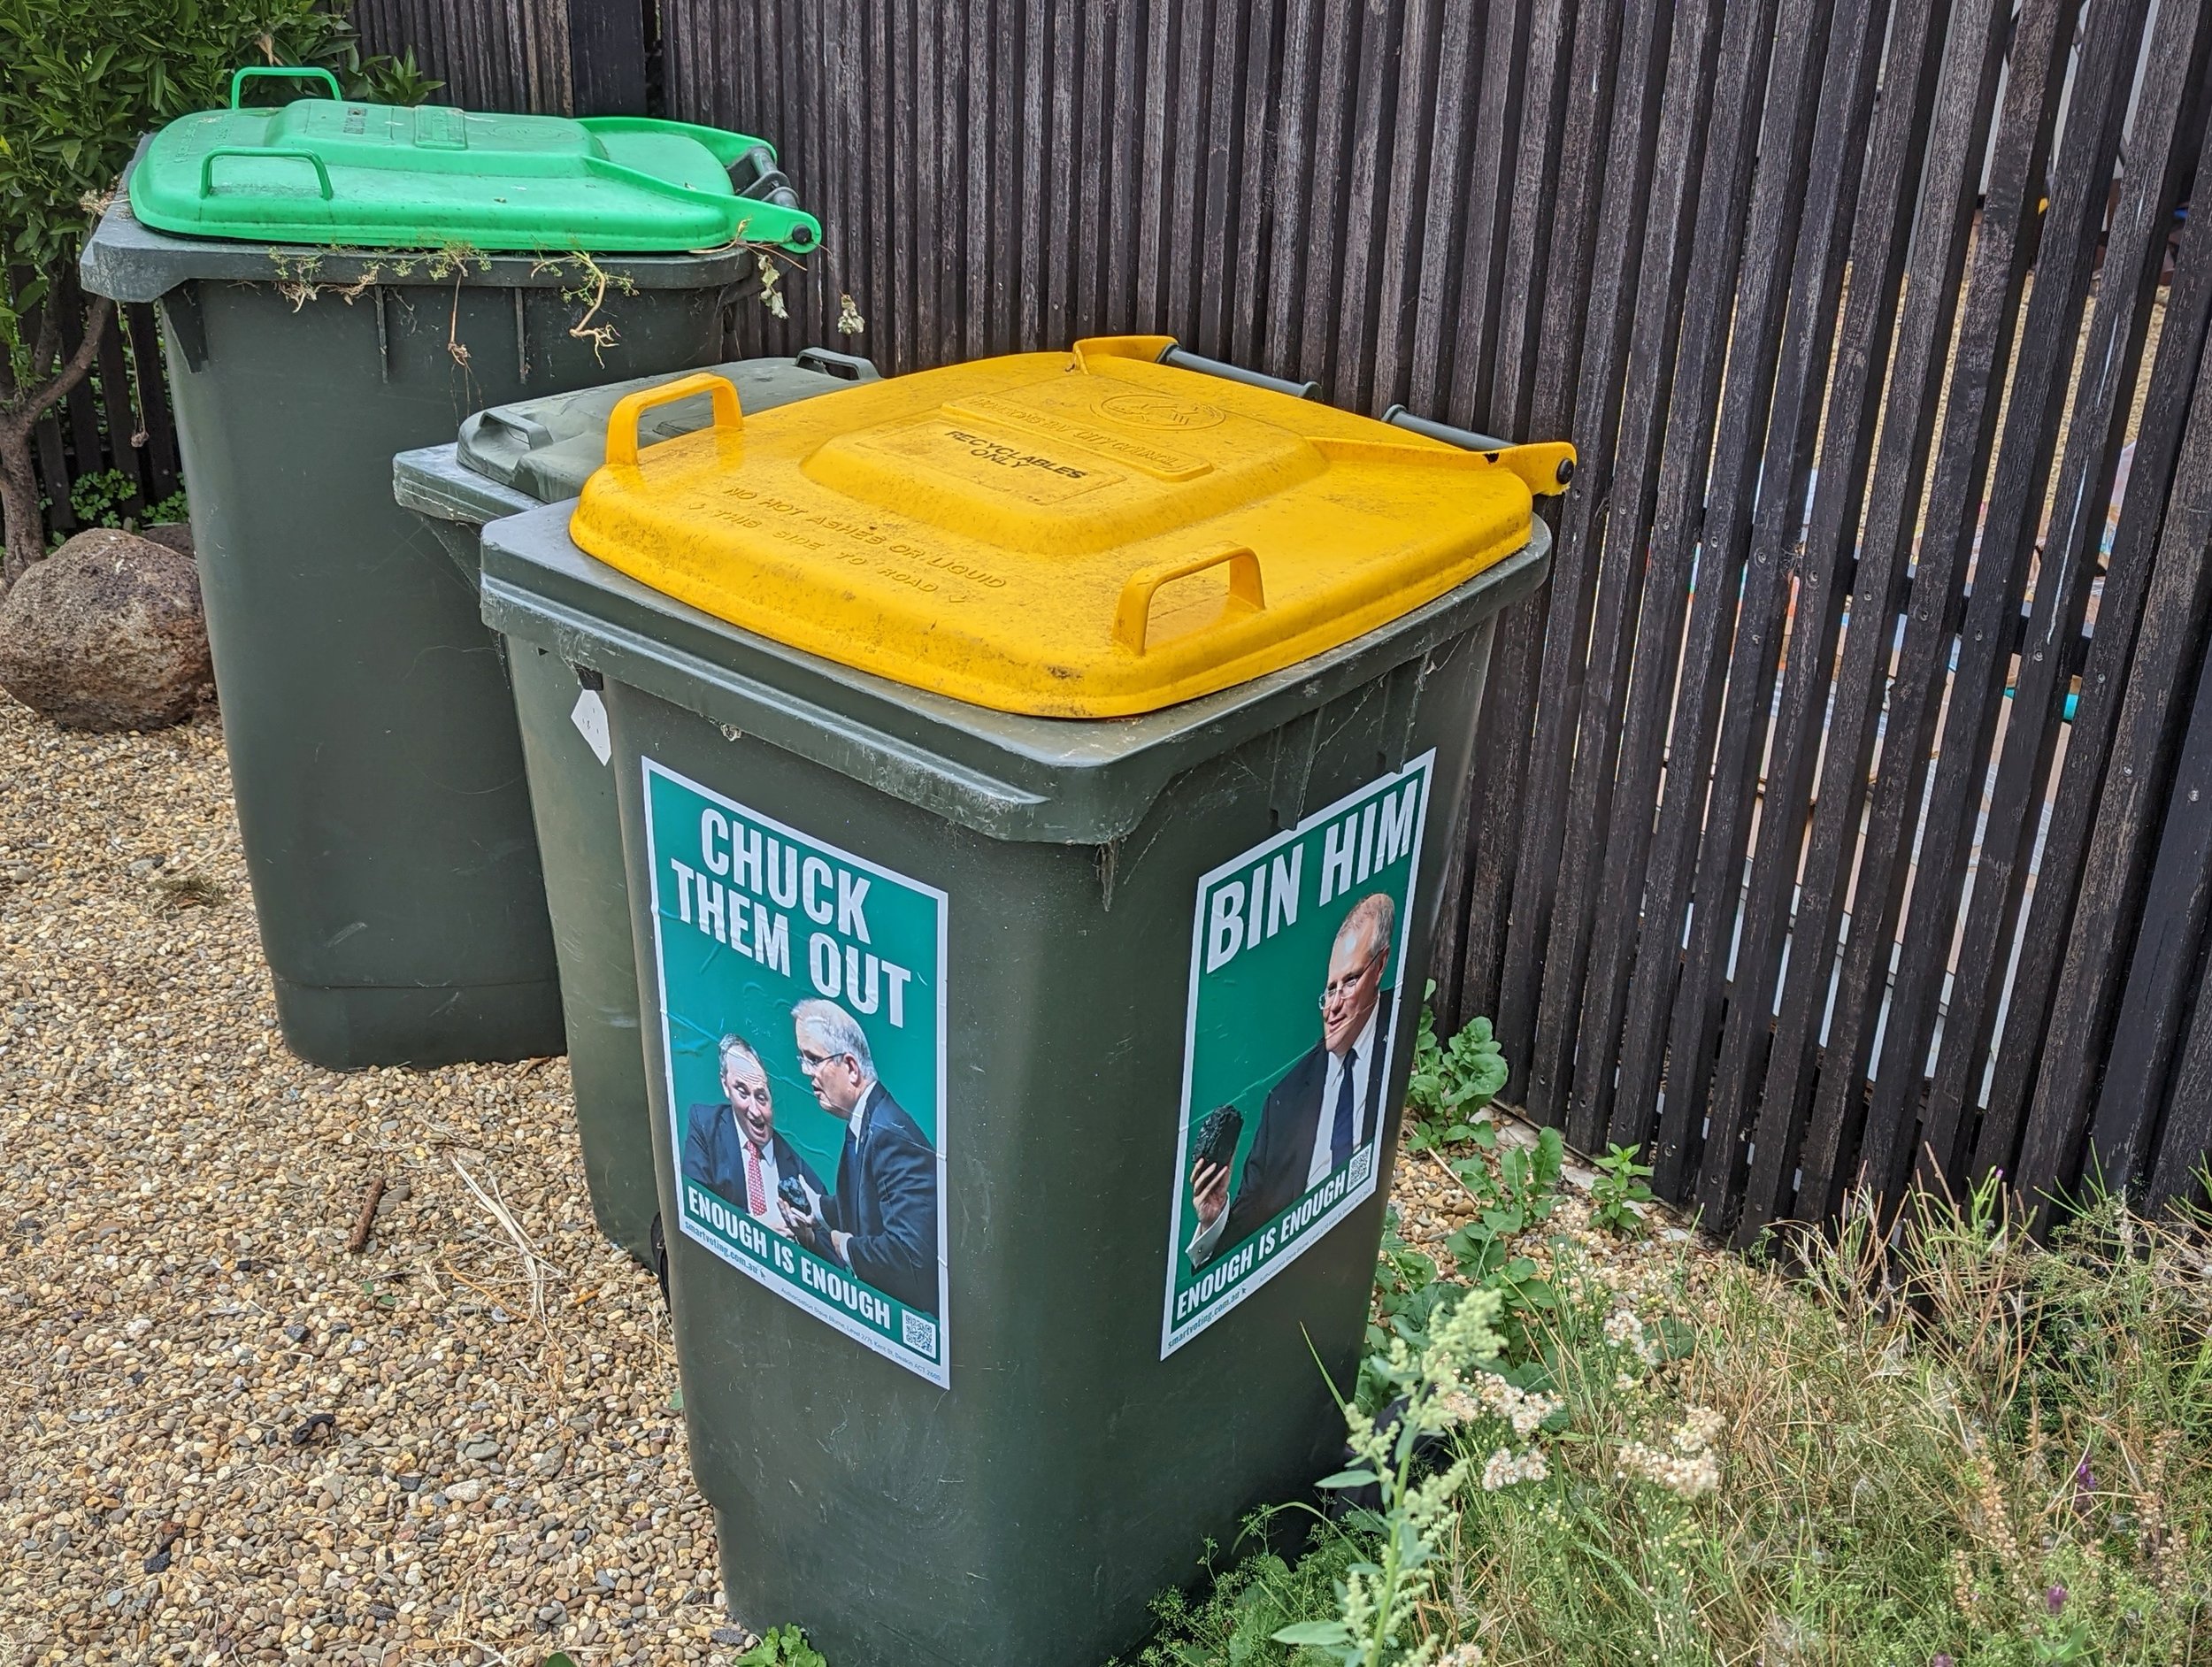  Photo of a large rubbish bin with large stickers on two sides. Both signs show Australian Prime Ministry Scott Morrison. One sign reads “CHUCK THEM OUT” and the other “BIN HIM”.  